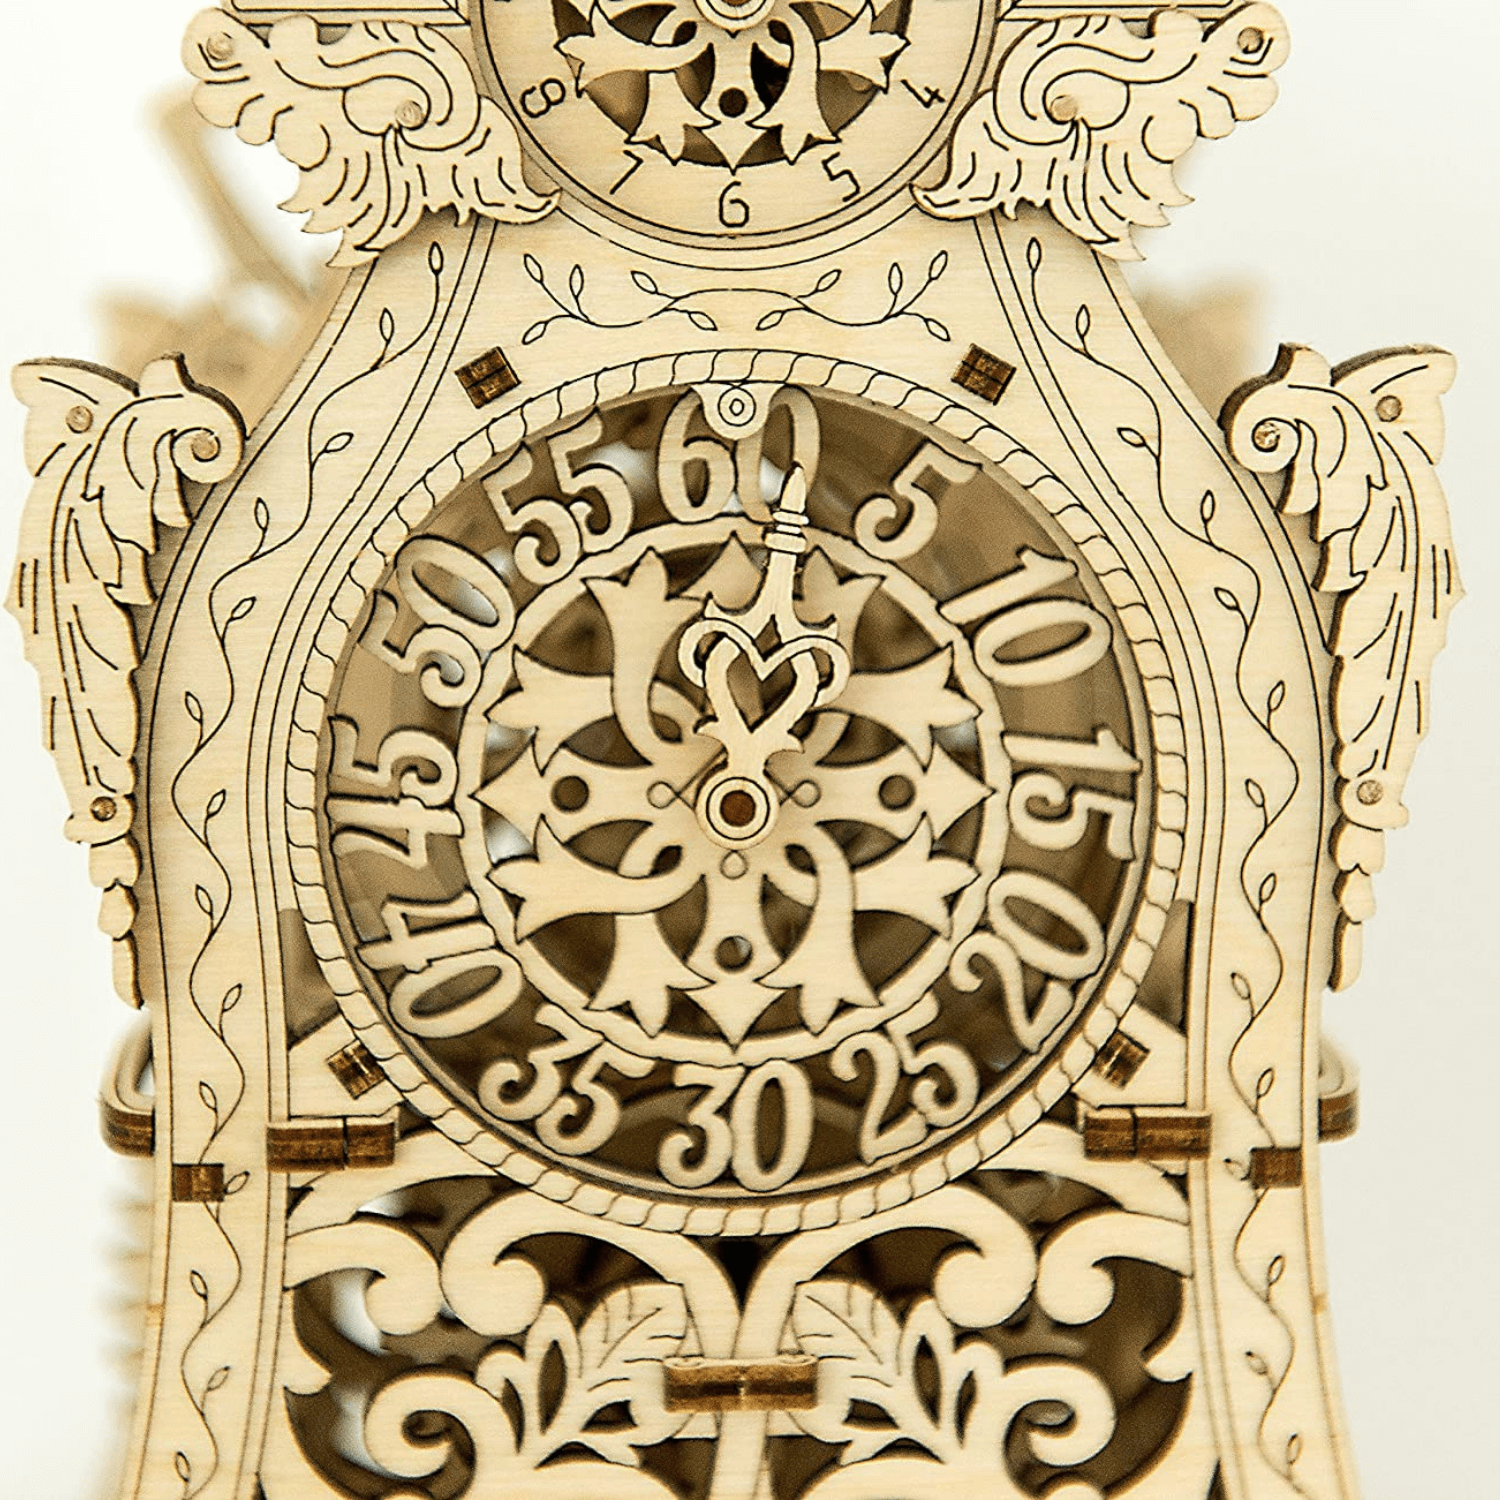 MagicClock-Mechanisches Holzpuzzle-WoodenCity--